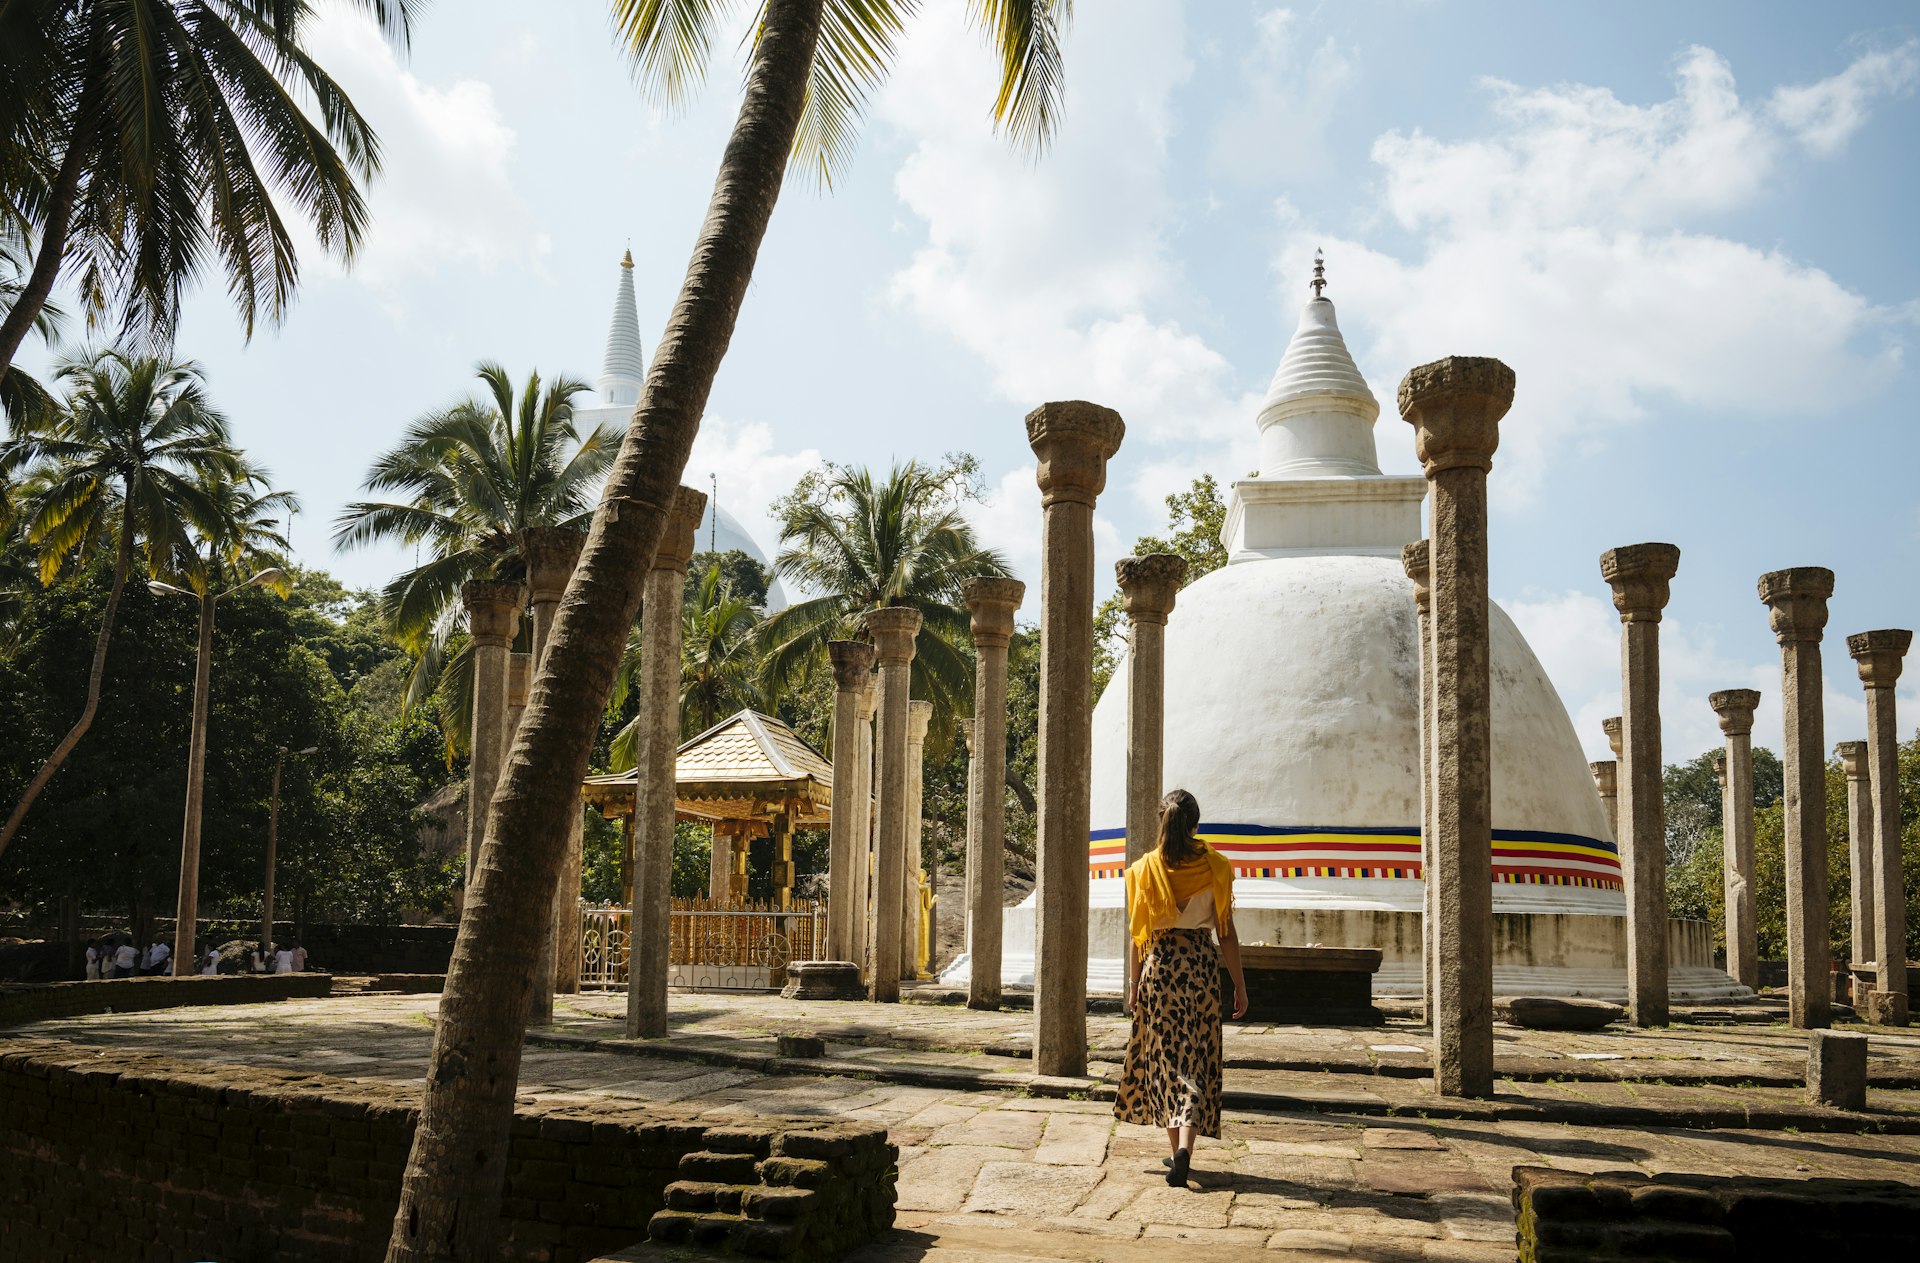 A woman shot from behind on a stone path, approaching a tipped-dome shrine (dagaba) ringed by columns in Sri Lanka 